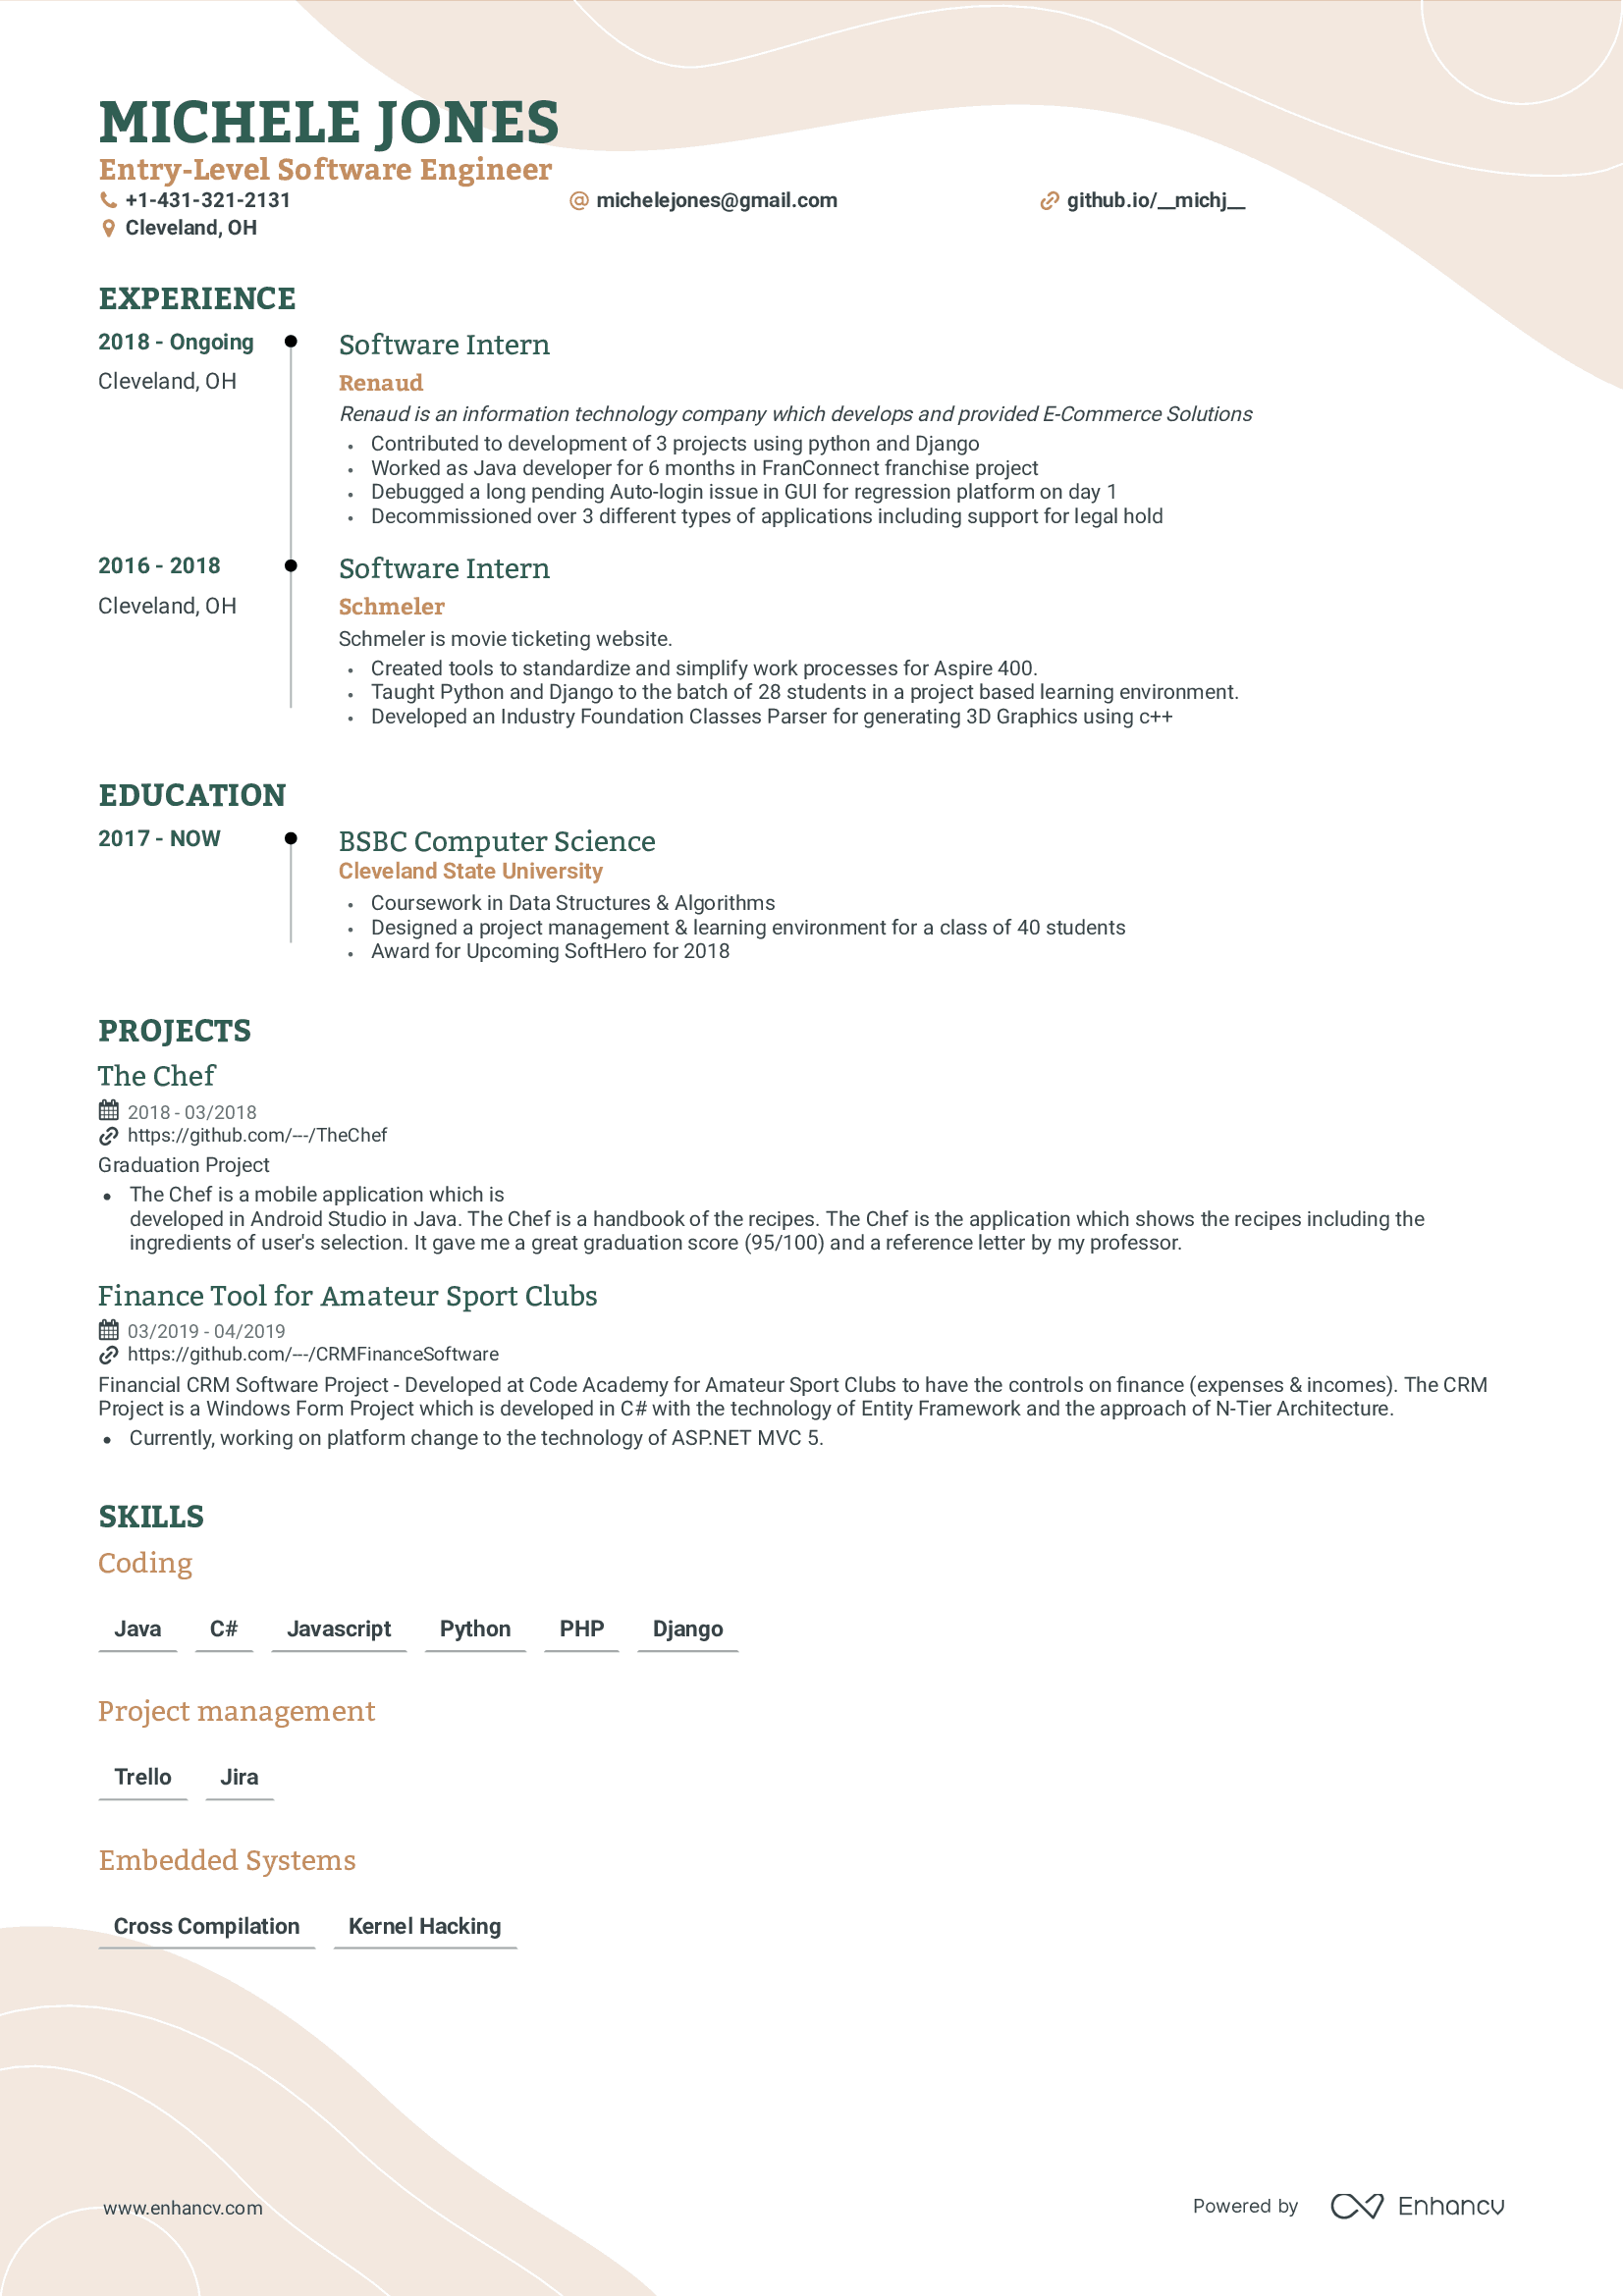 Entry Level Software Engineer resume.png